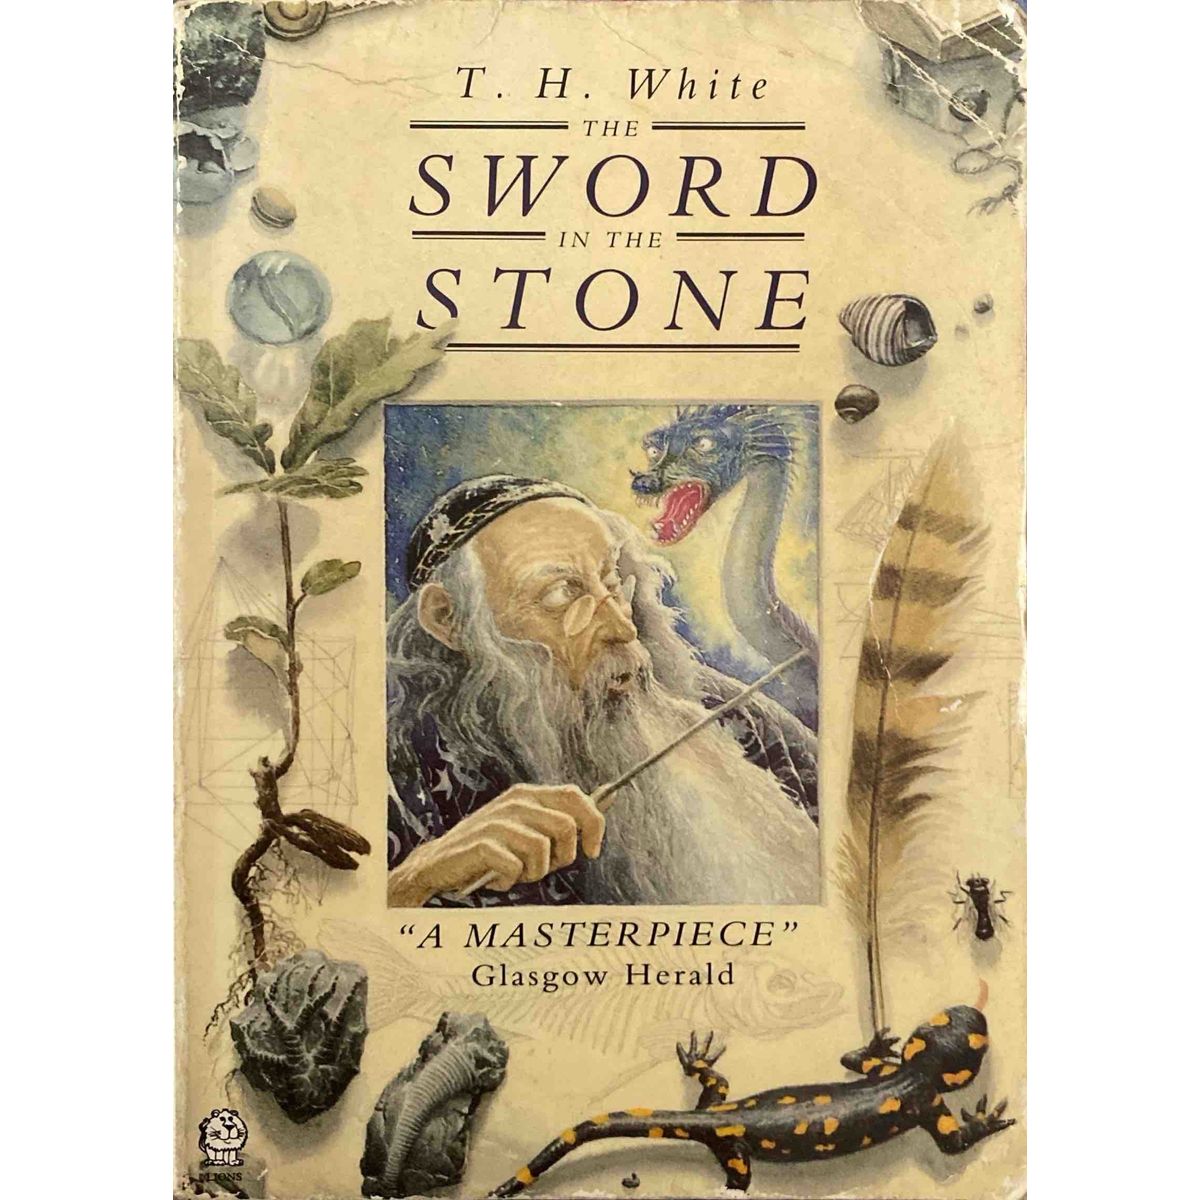 ISBN: 9780006704171 / 0006704174 - The Sword in the Stone by T.H. White [1971]